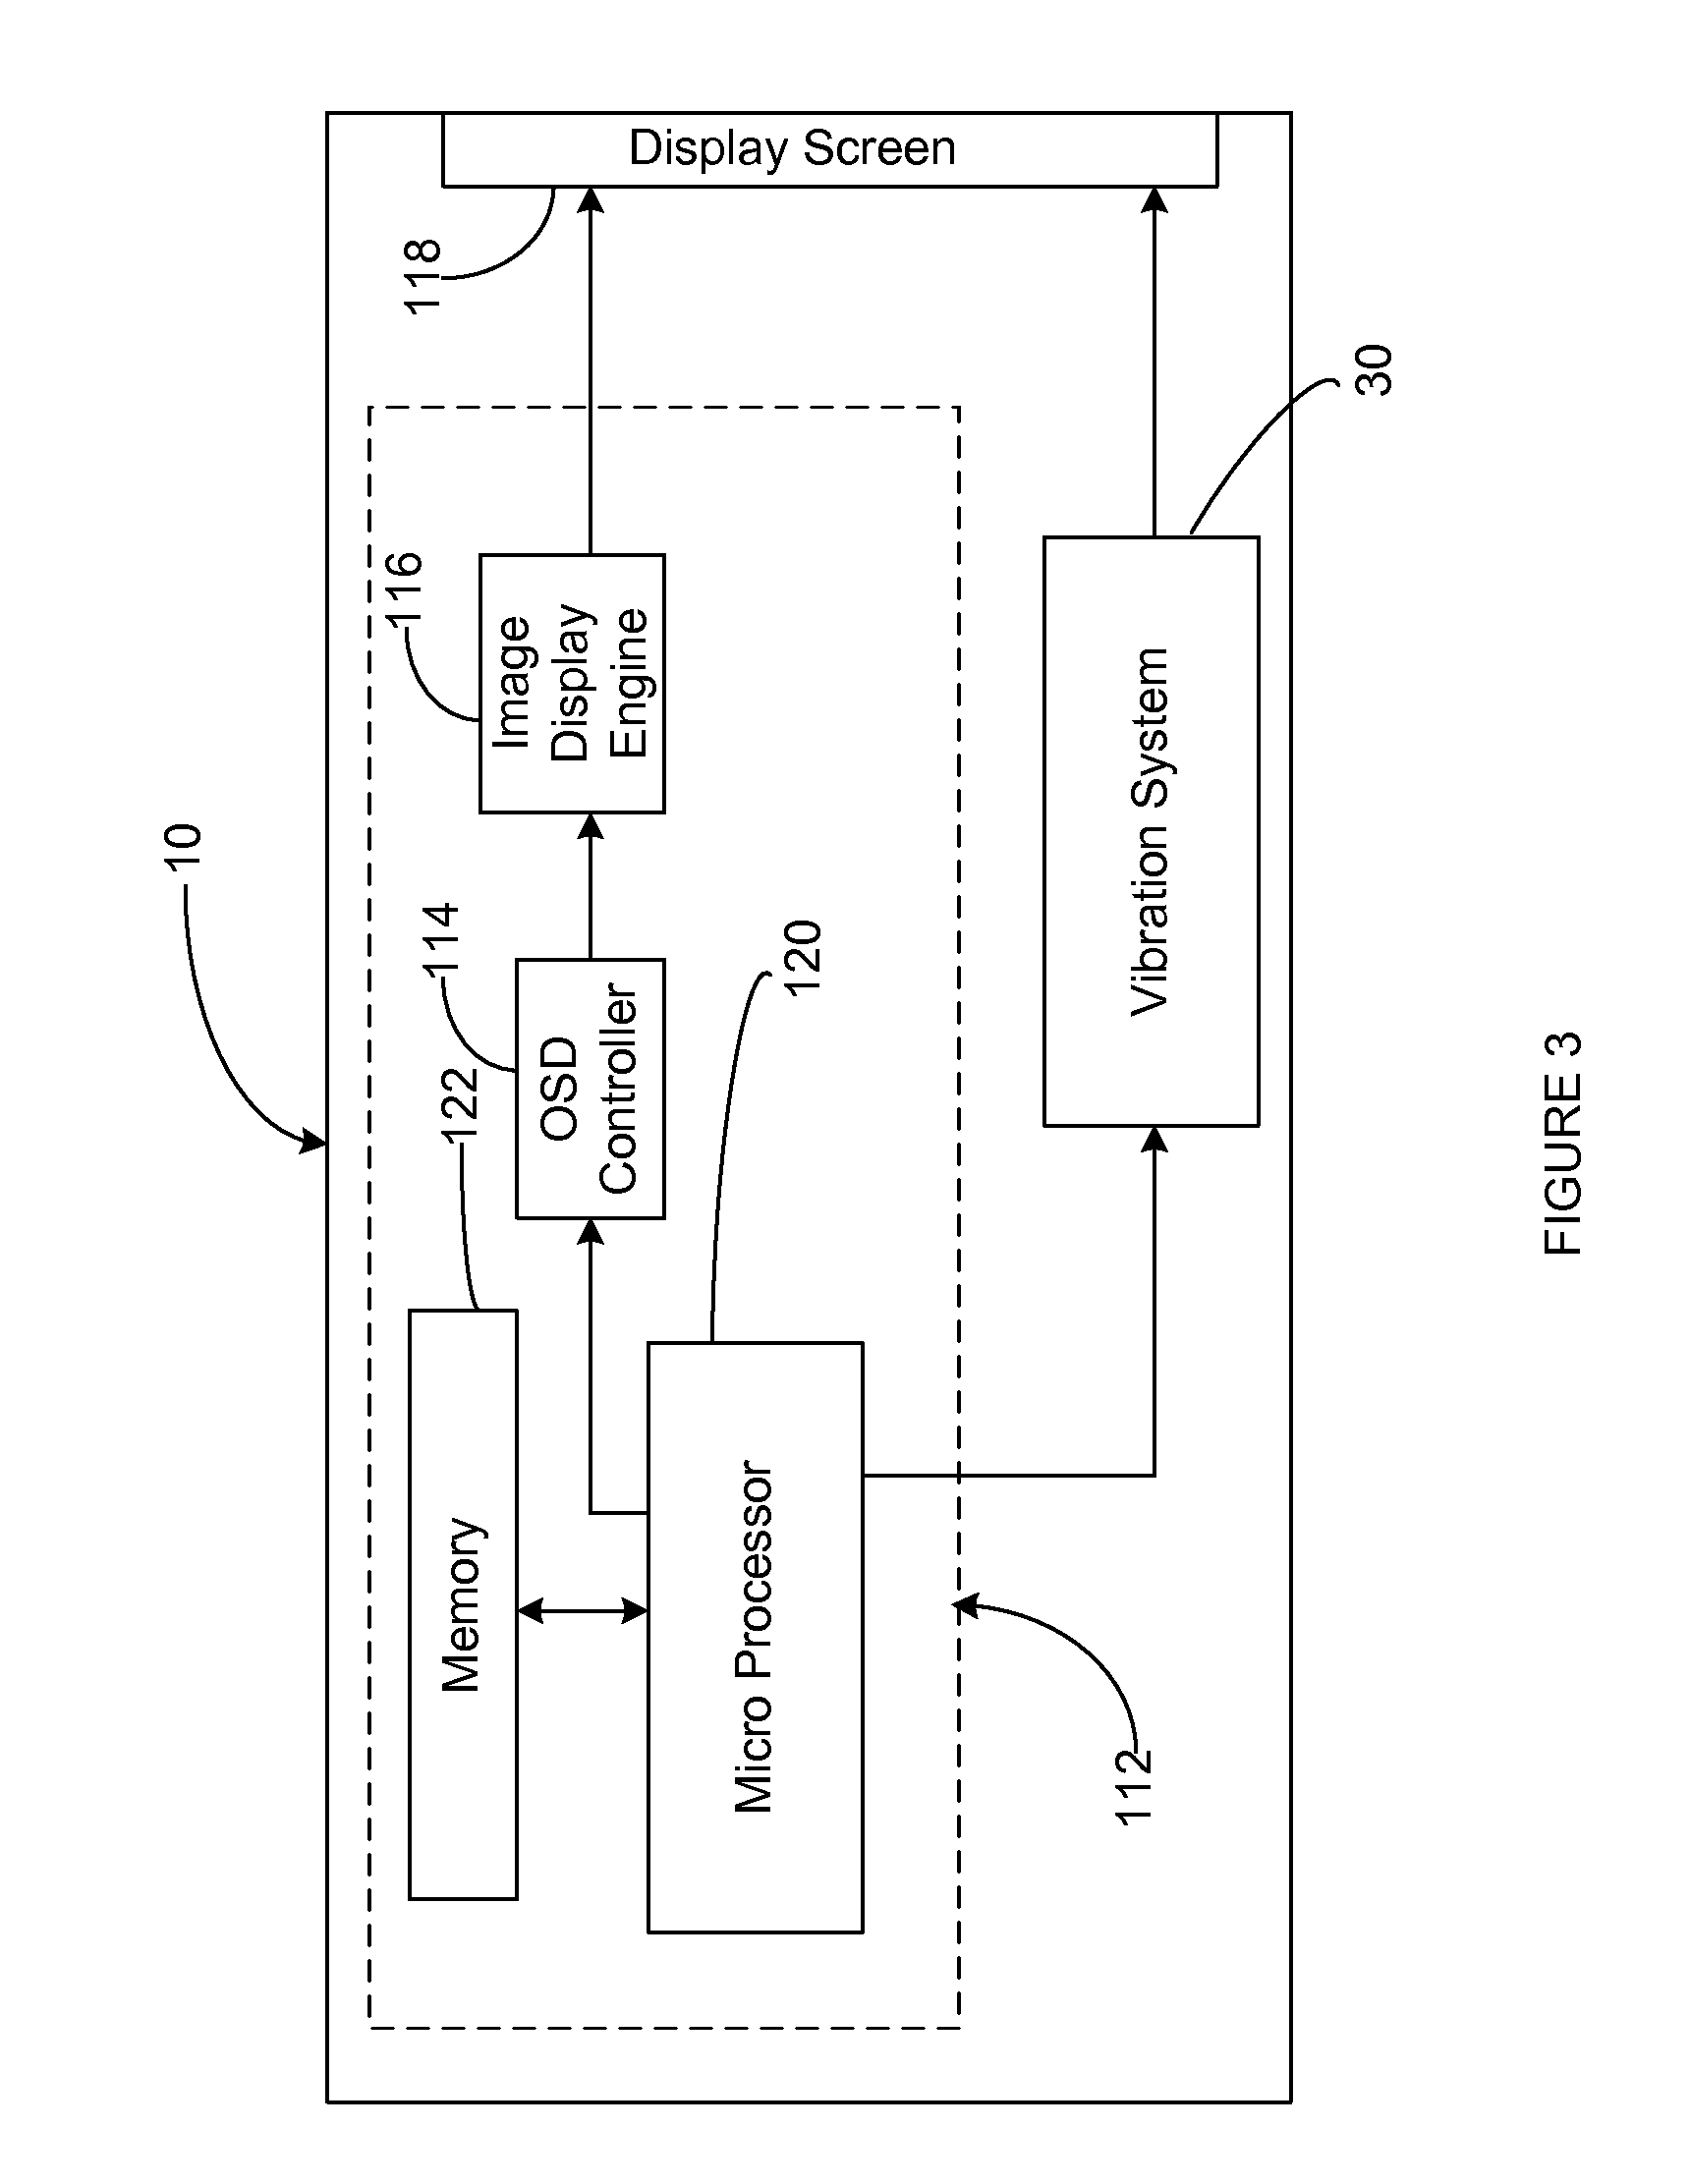 Systems and methods for eliminating laser light source scintillation in a projection television